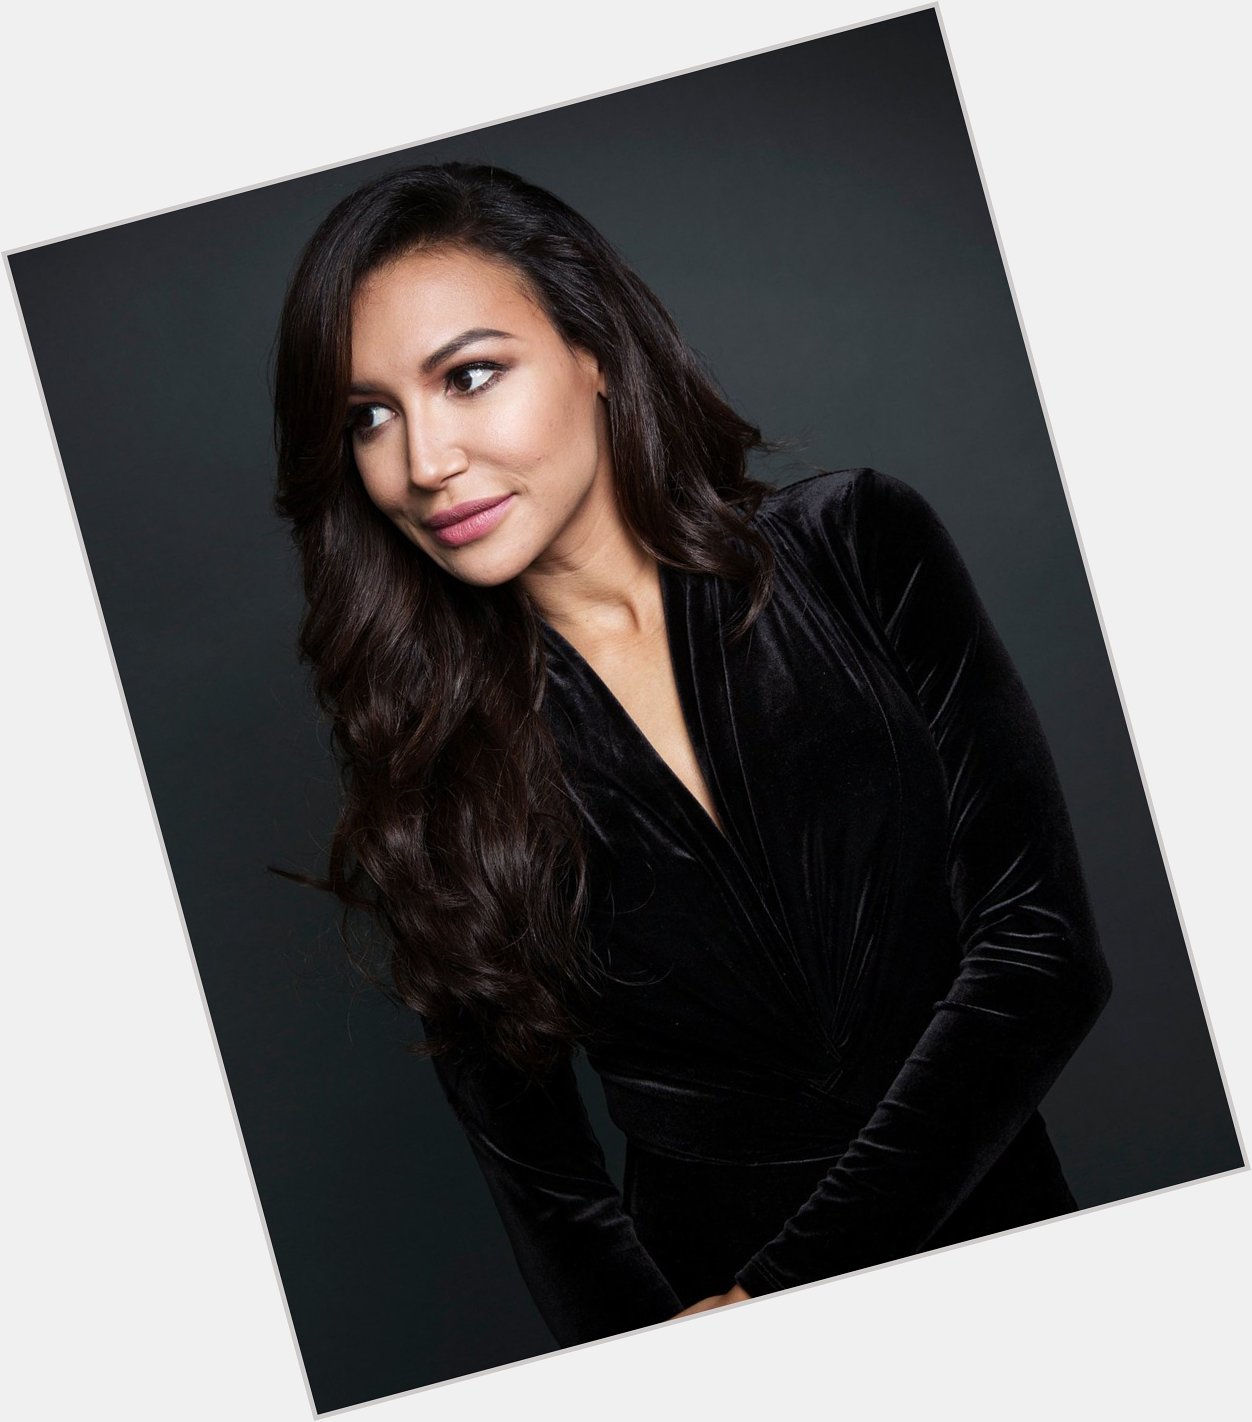 On what would have been her 34th birthday, we remember Naya Rivera Happy birthday queen. 